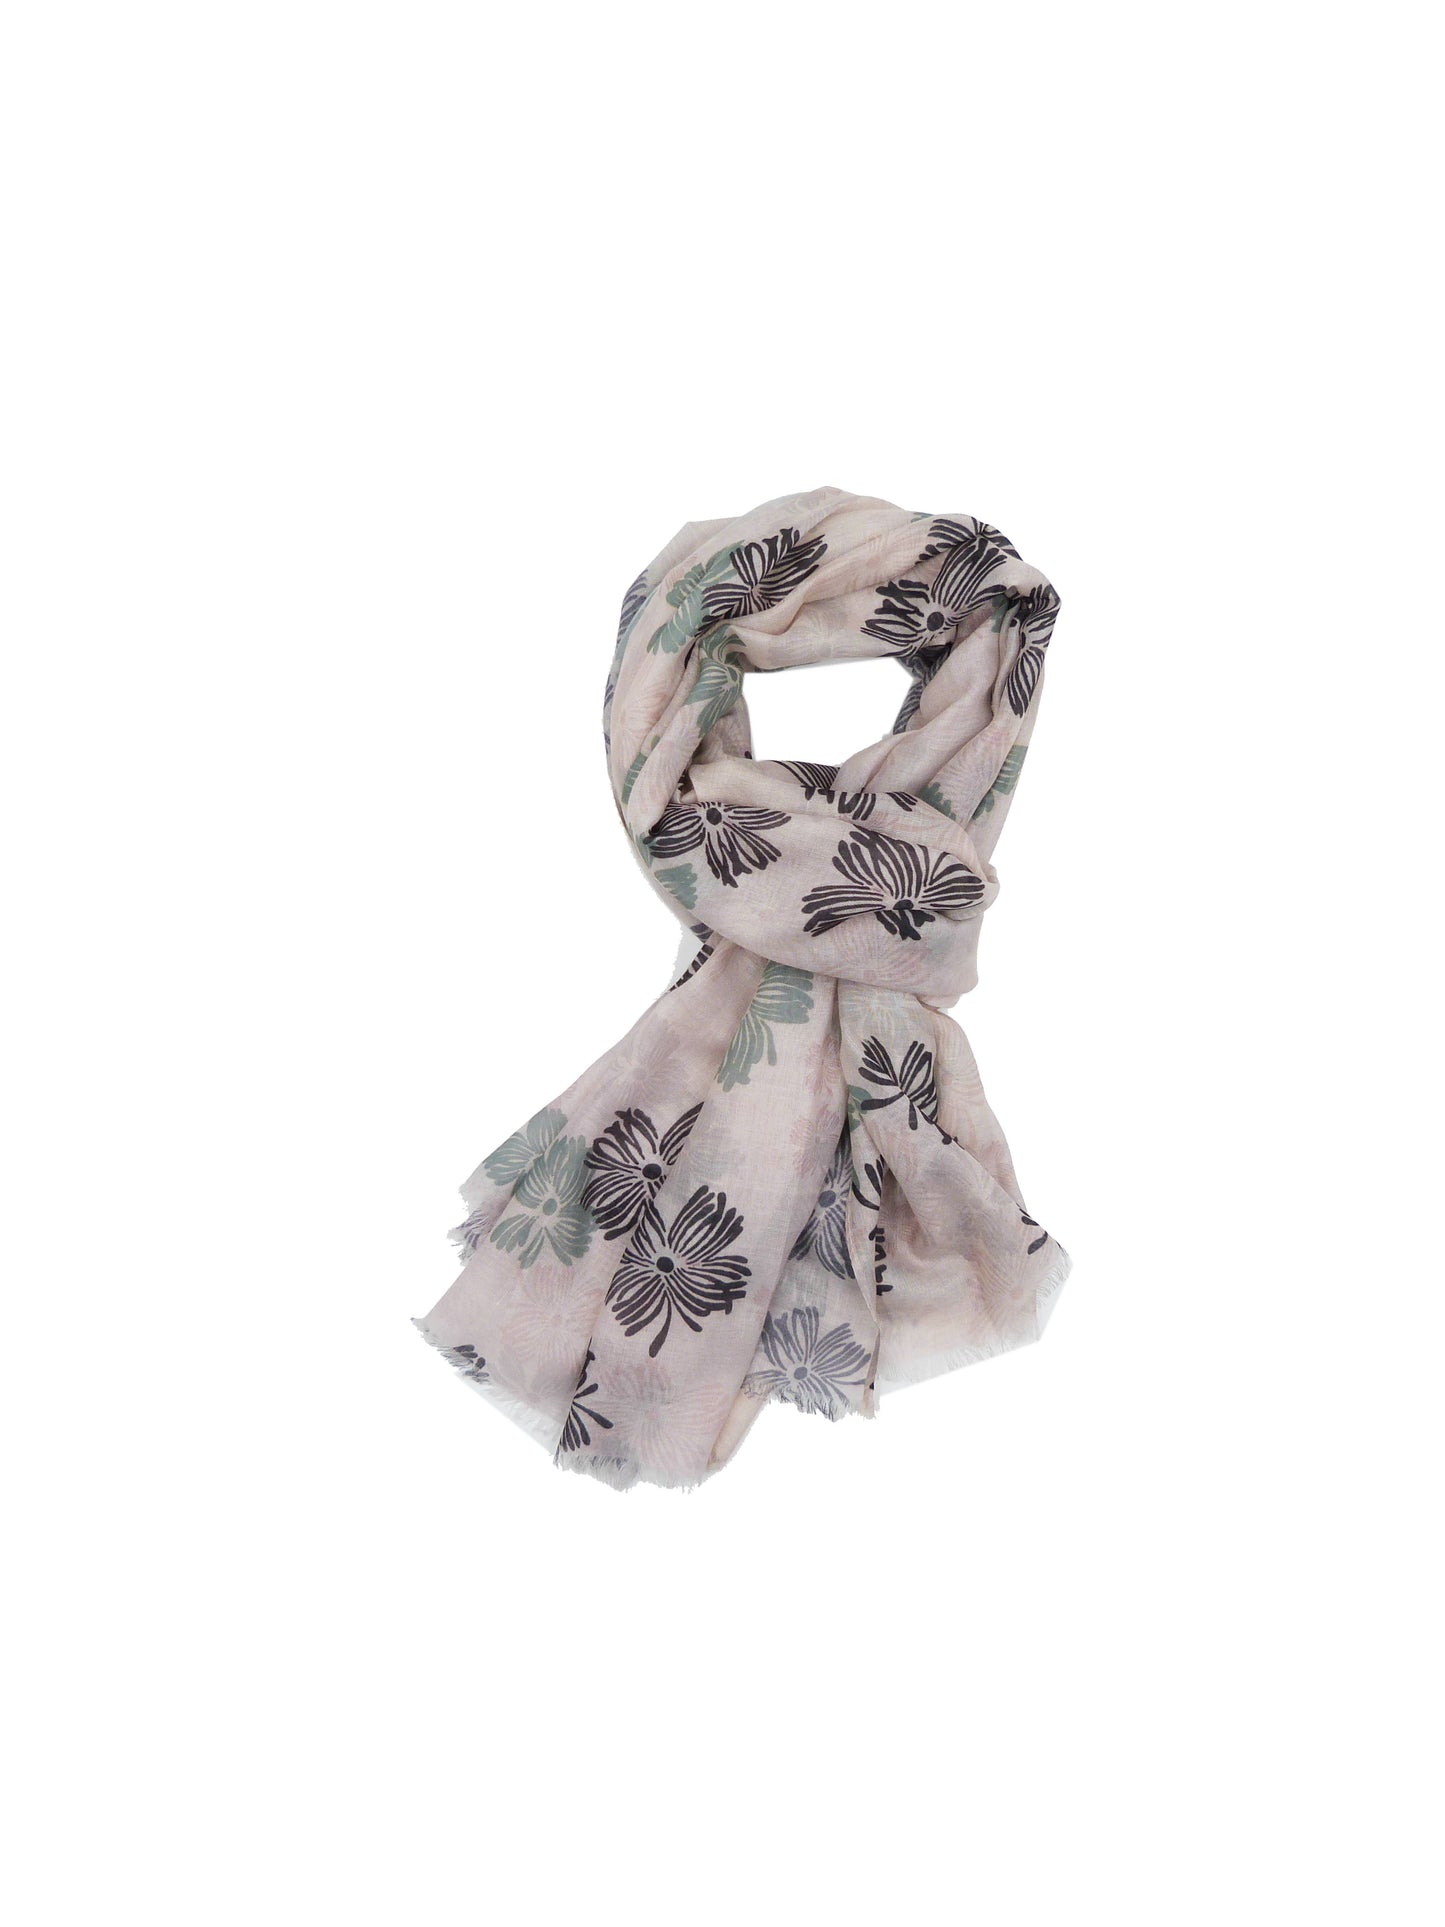 Flower Patterned High Quality Fashion Scarf